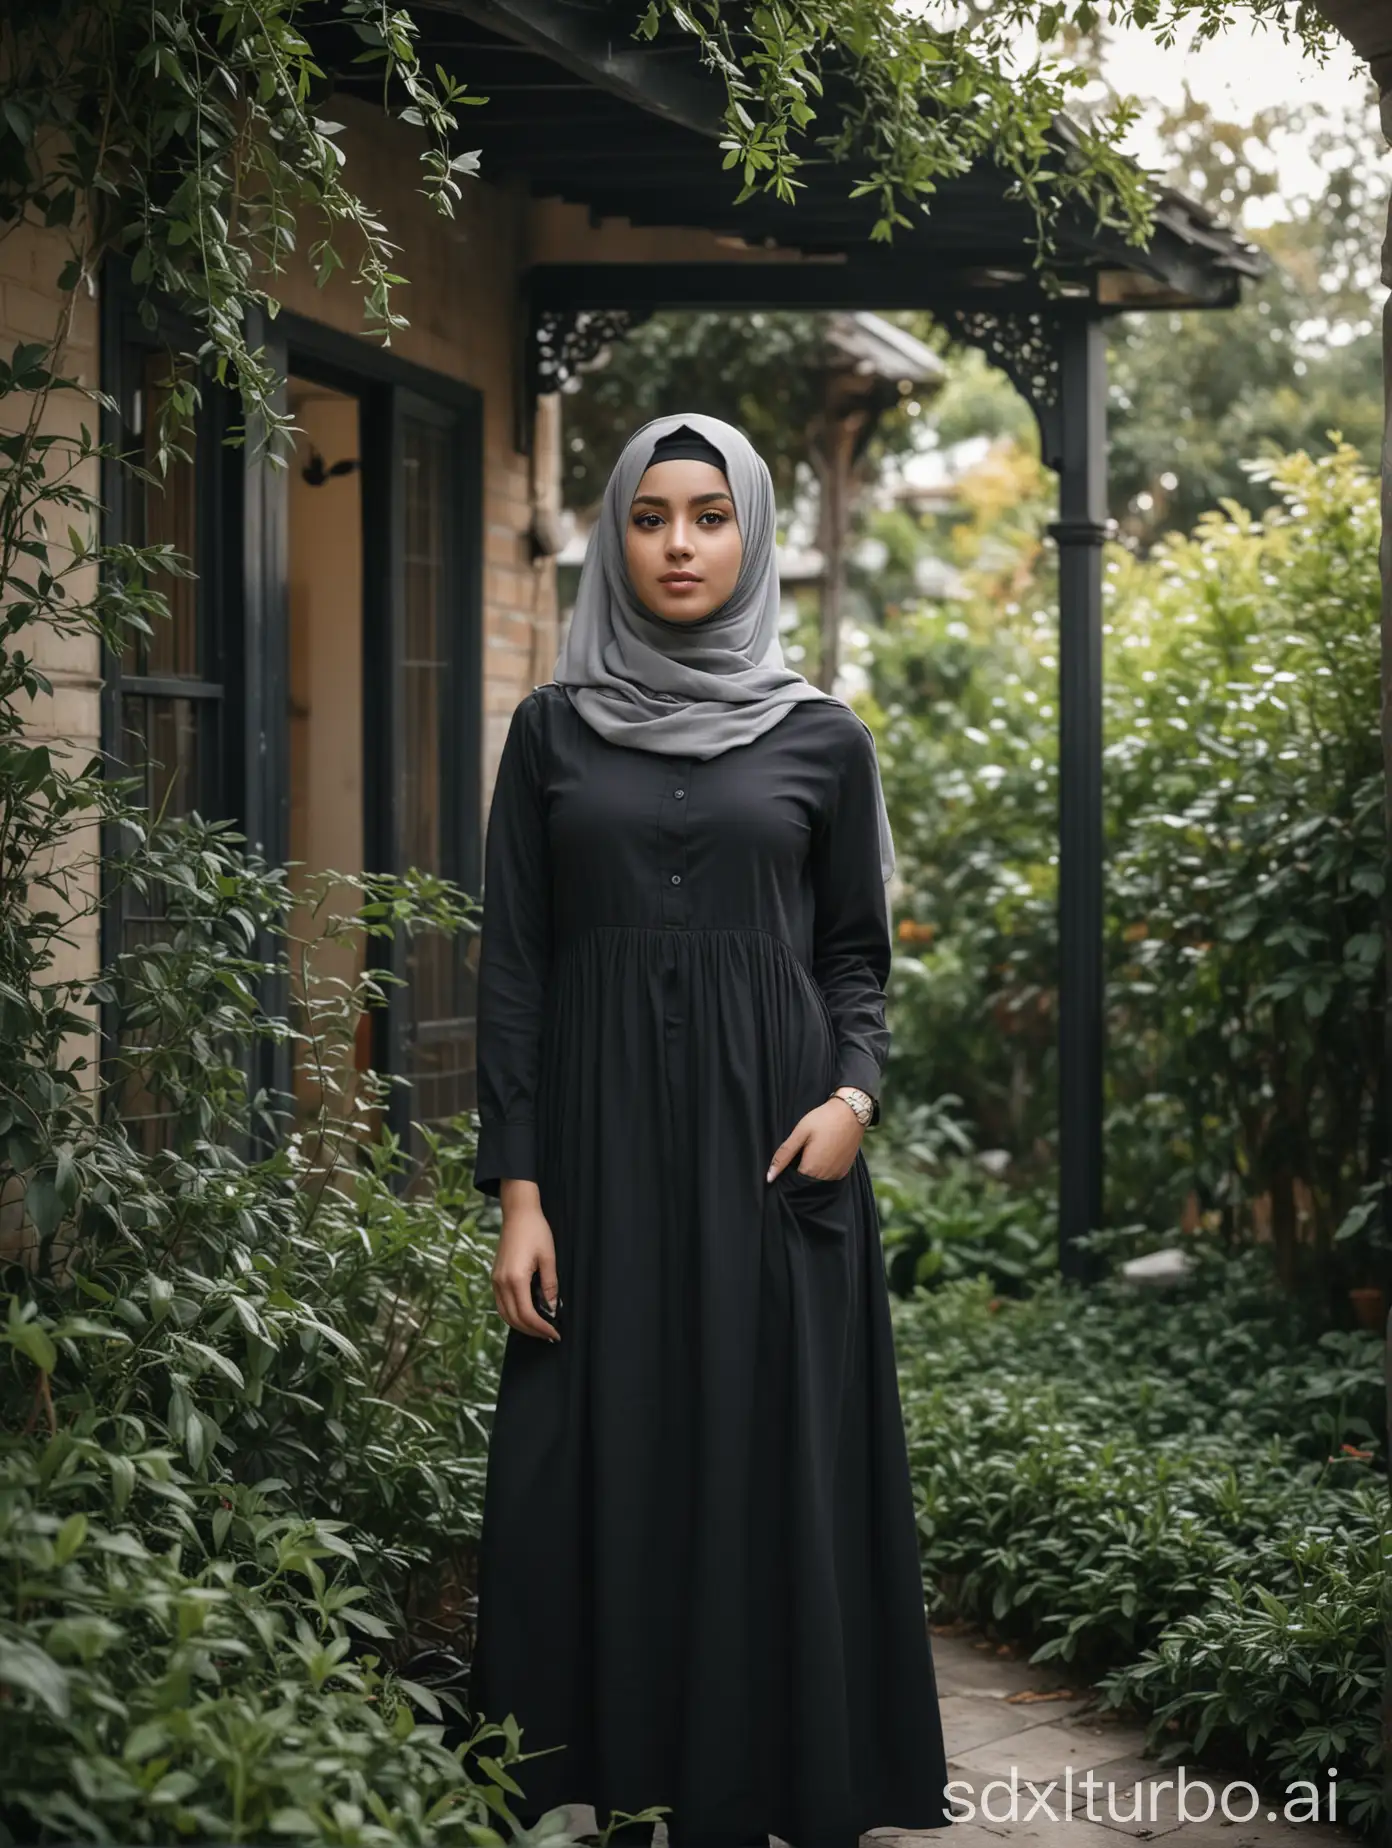 a yaoung women,wearing grey shirt collar sleeves rolled up, black hijab,black long dress,standing on garden house ,looking body sideways,stare Camera,frame of leaves ,morning ,Realistic photography,low view angle